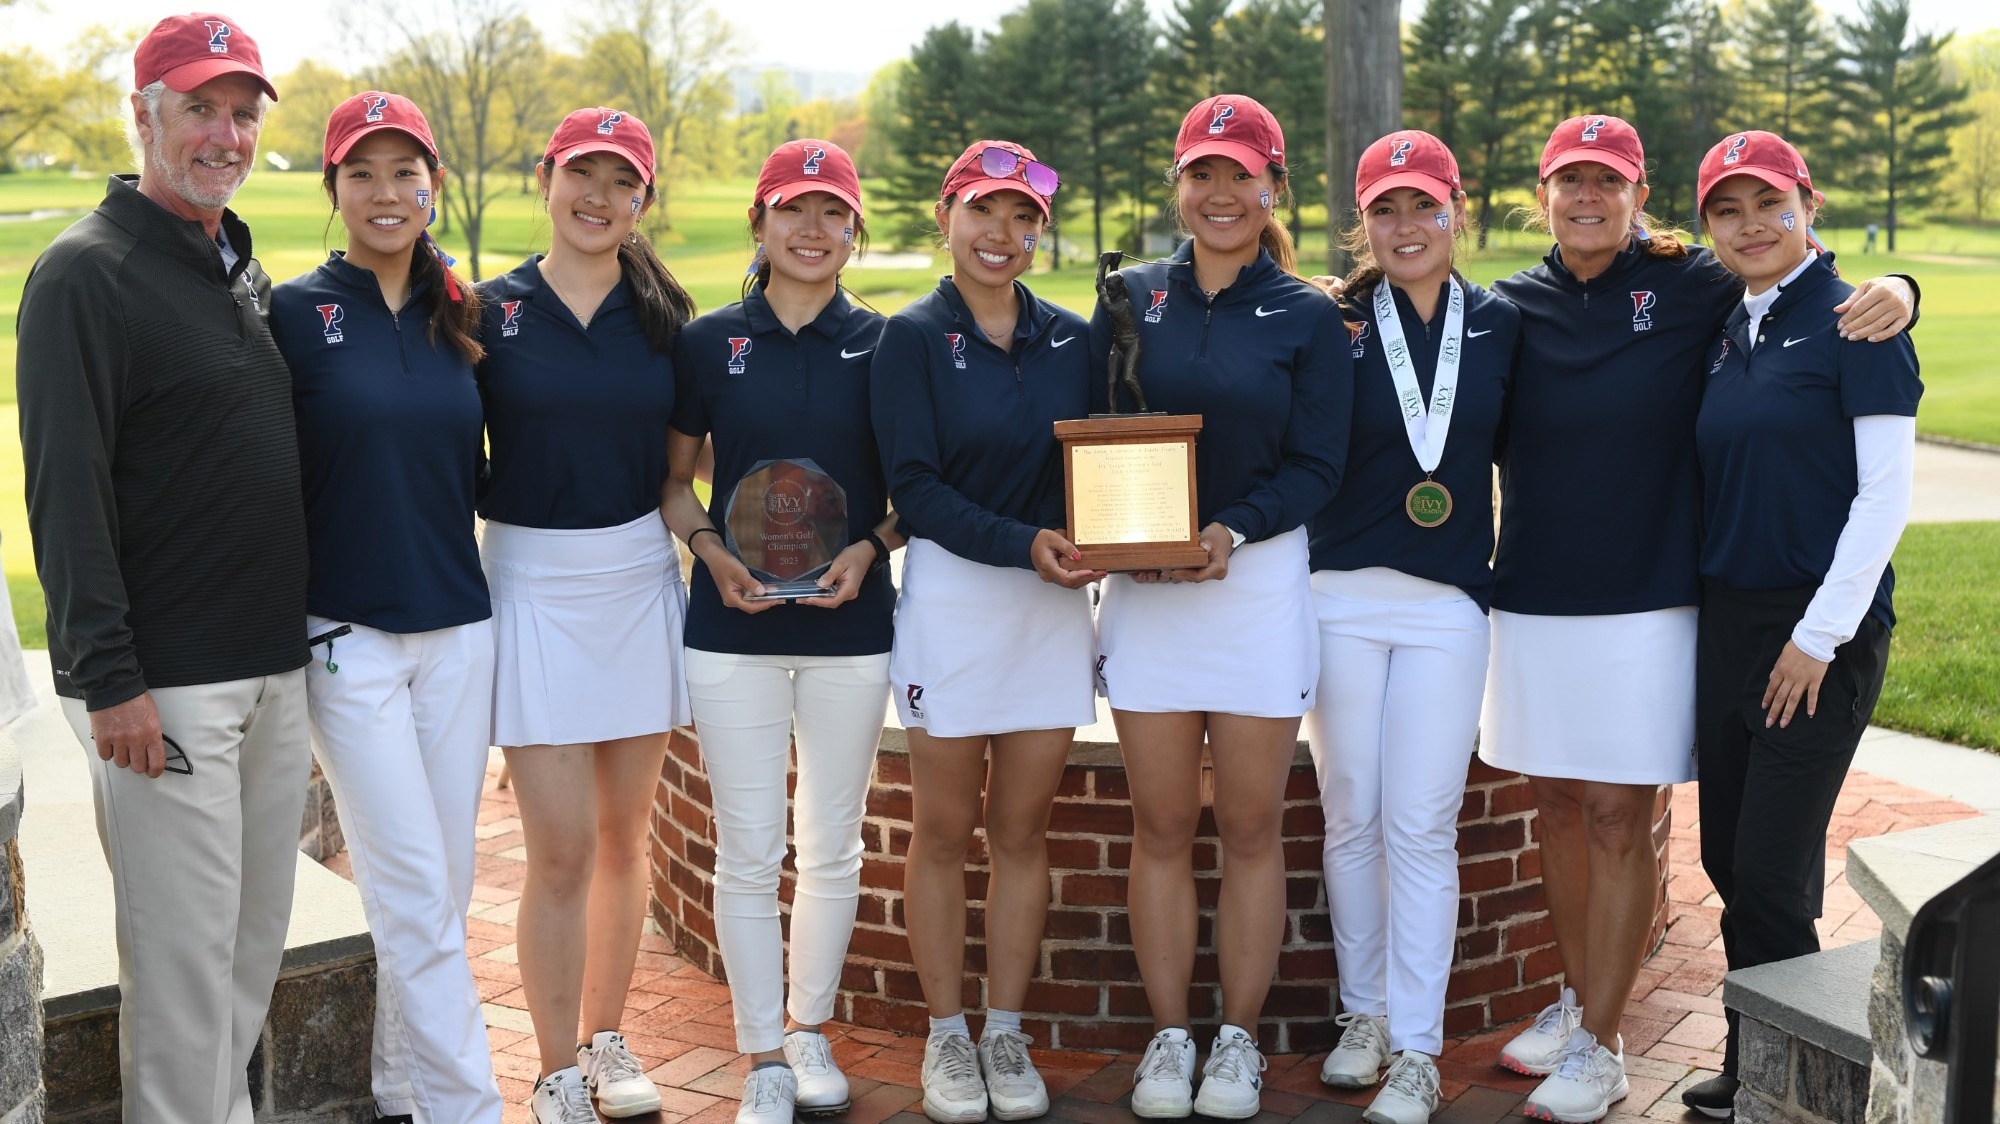 Penn's women's golf team and their coach celebrating first place title.